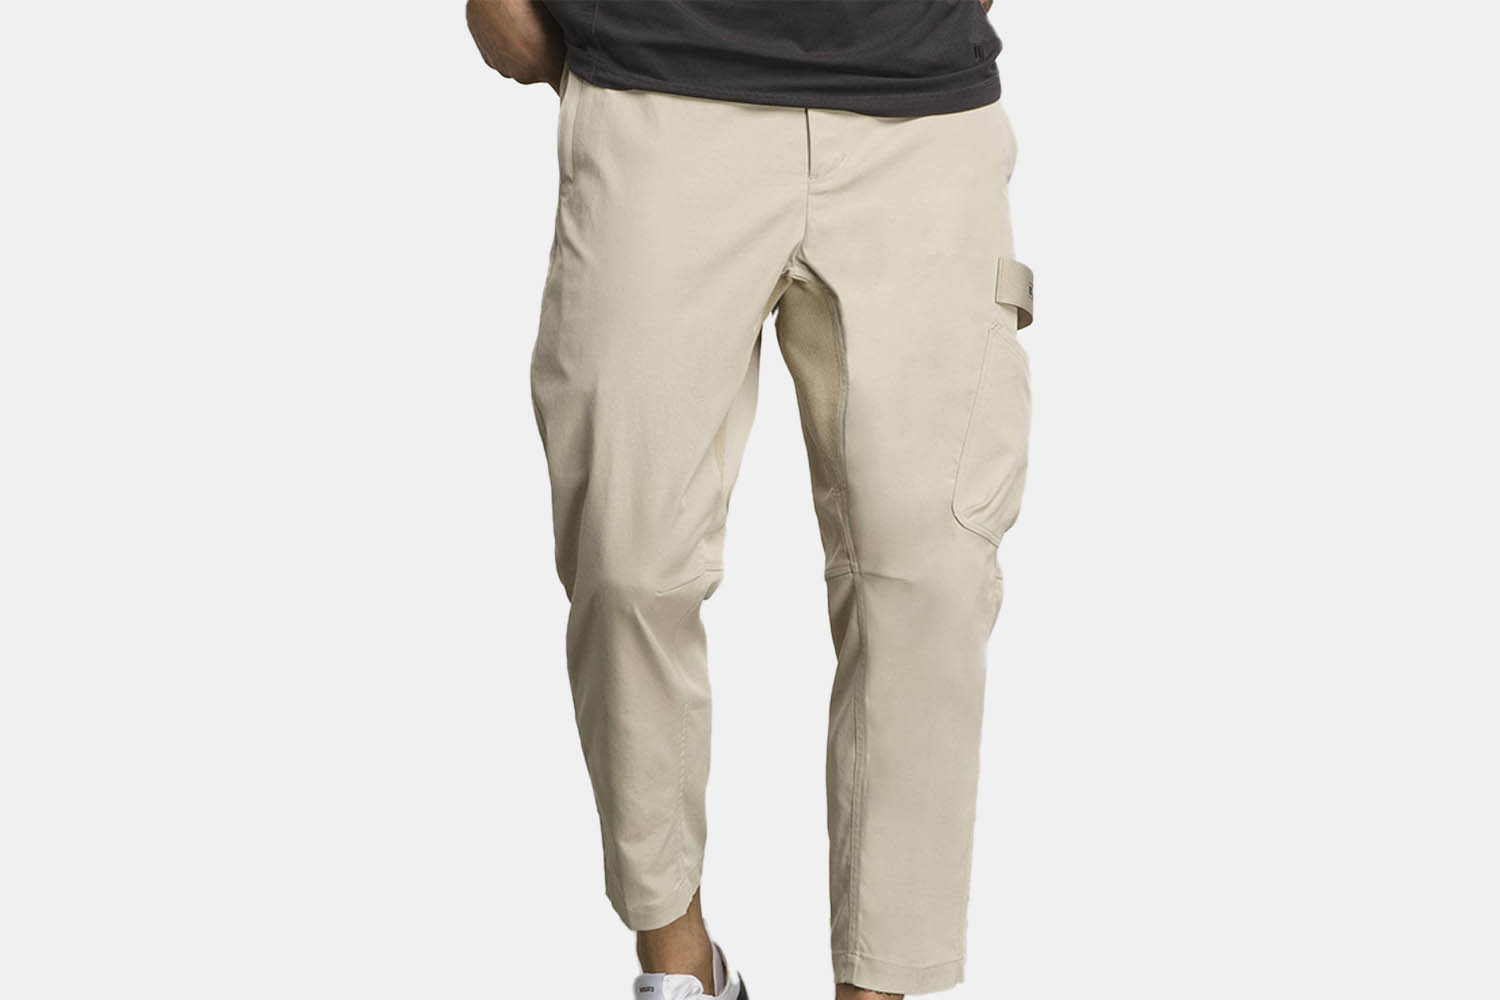 a pair of tan pants with a beer pocket